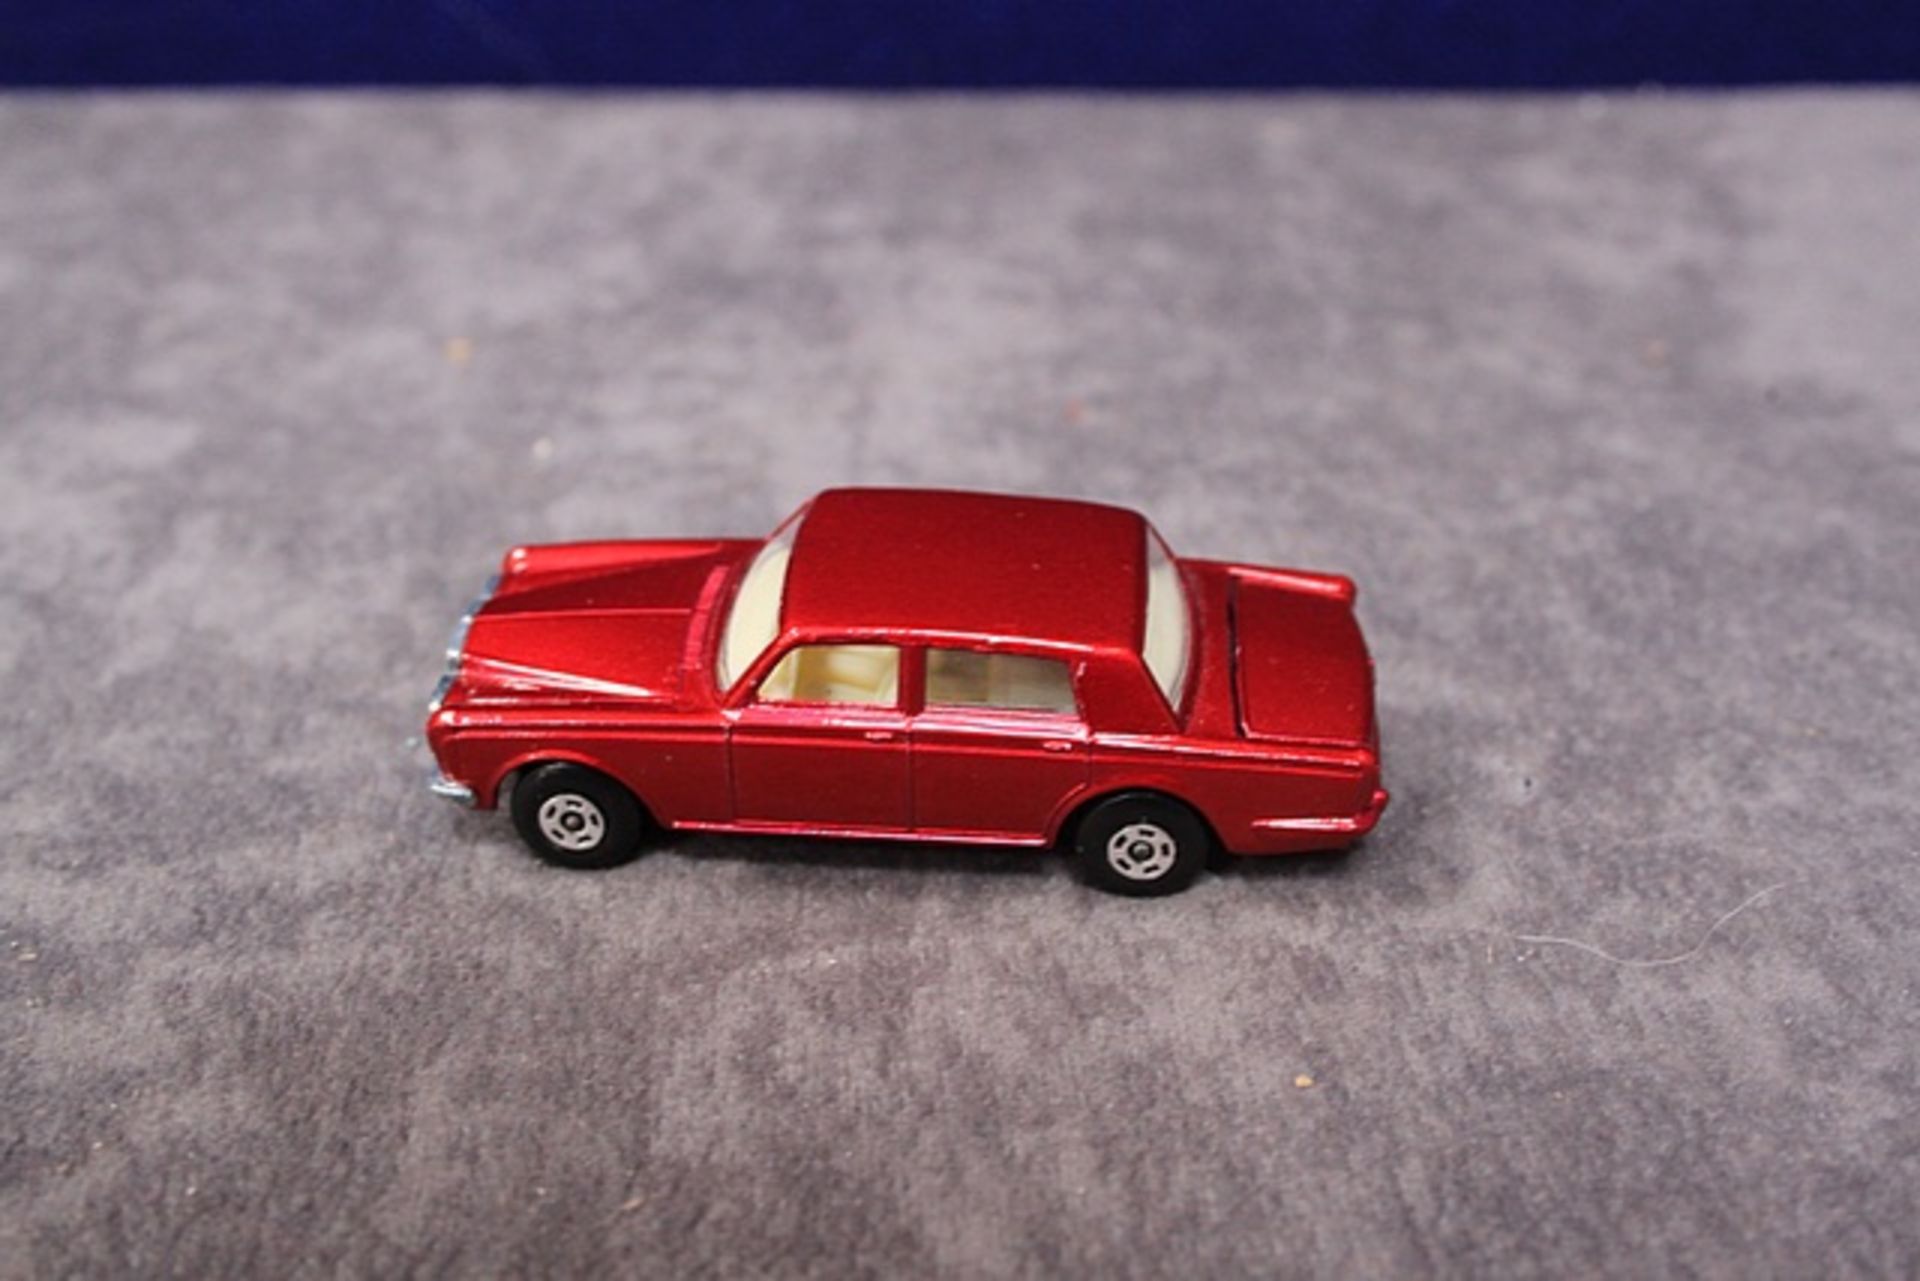 Mint Matchbox Superfast Diecast # 24 Rolls Royce Silver Shadow With Pink Base In Crisp Box - Image 2 of 3